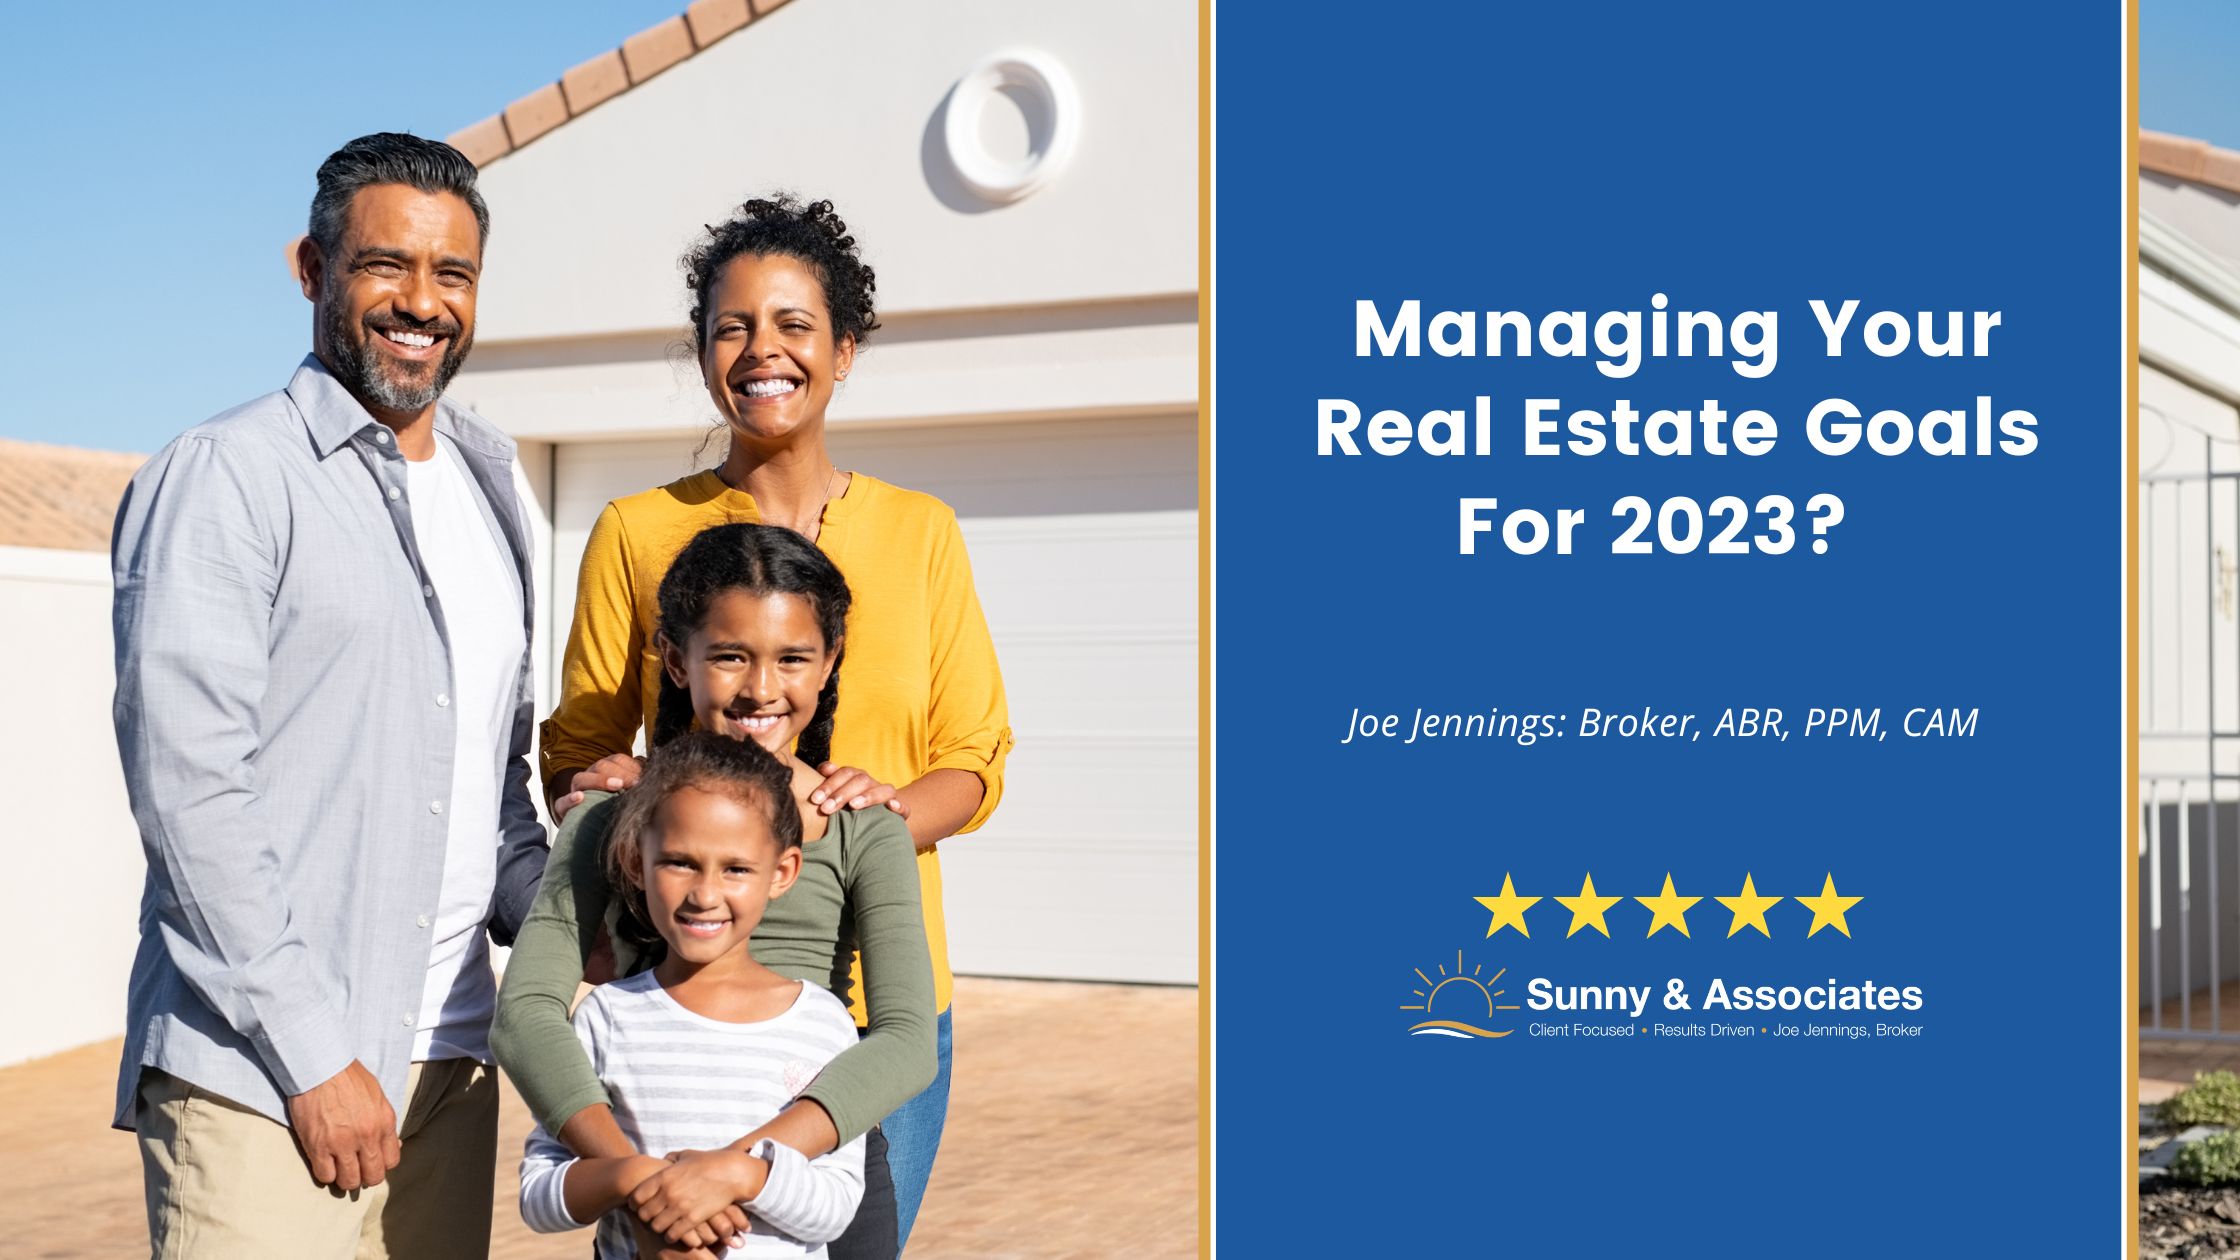 Managing Your Real Estate Goals For 2023?